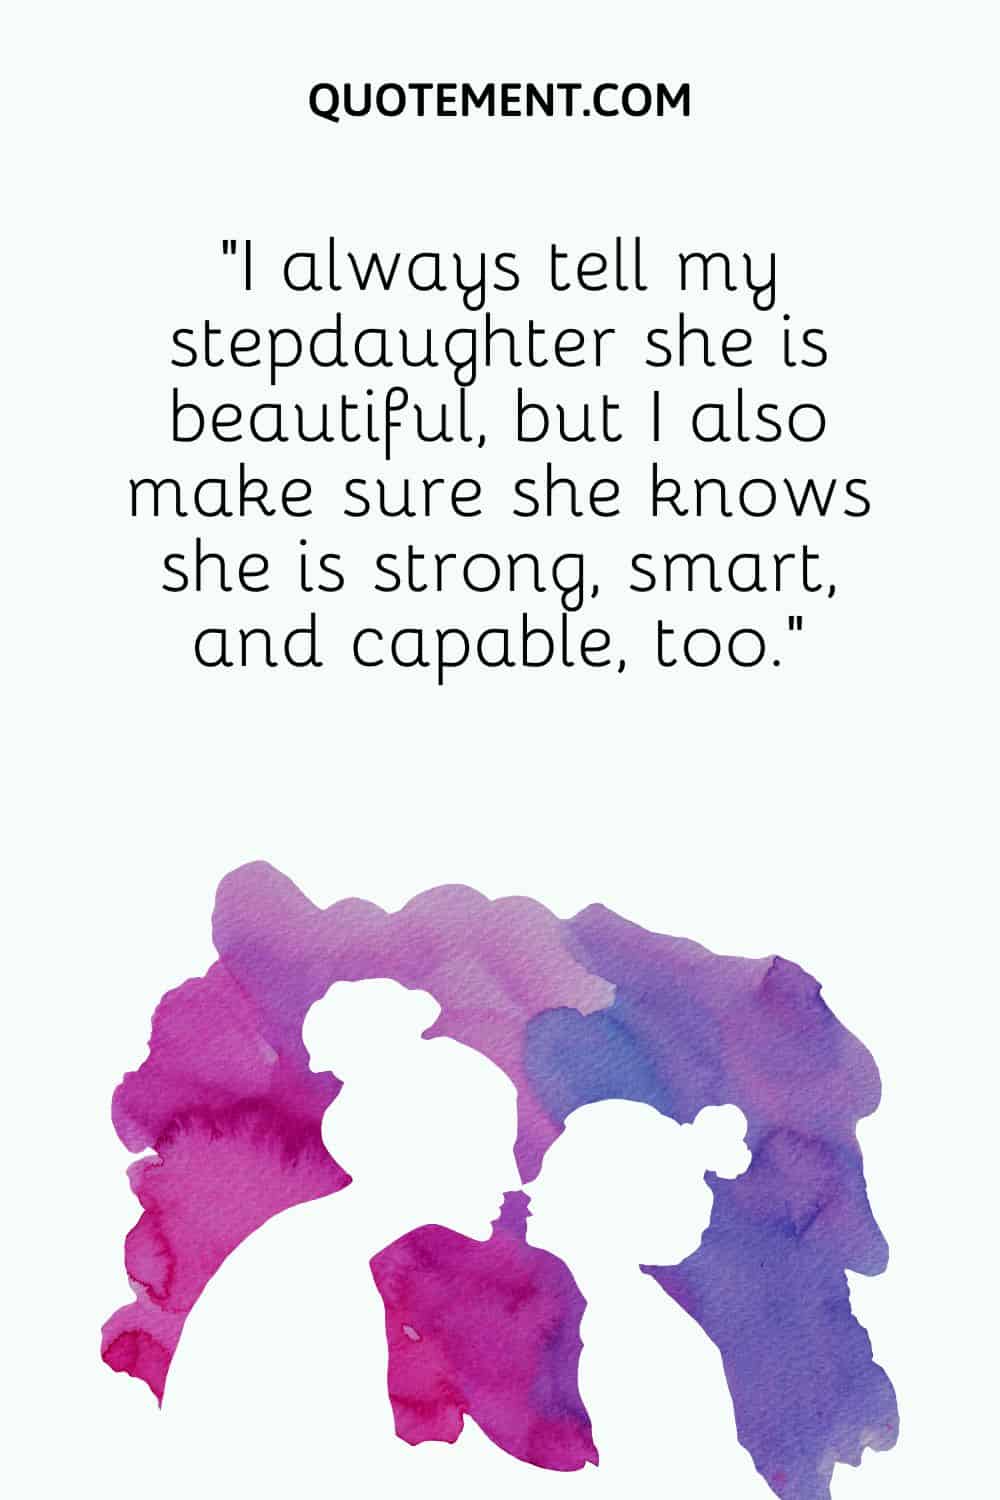 I always tell my stepdaughter she is beautiful, but I also make sure she knows she is strong